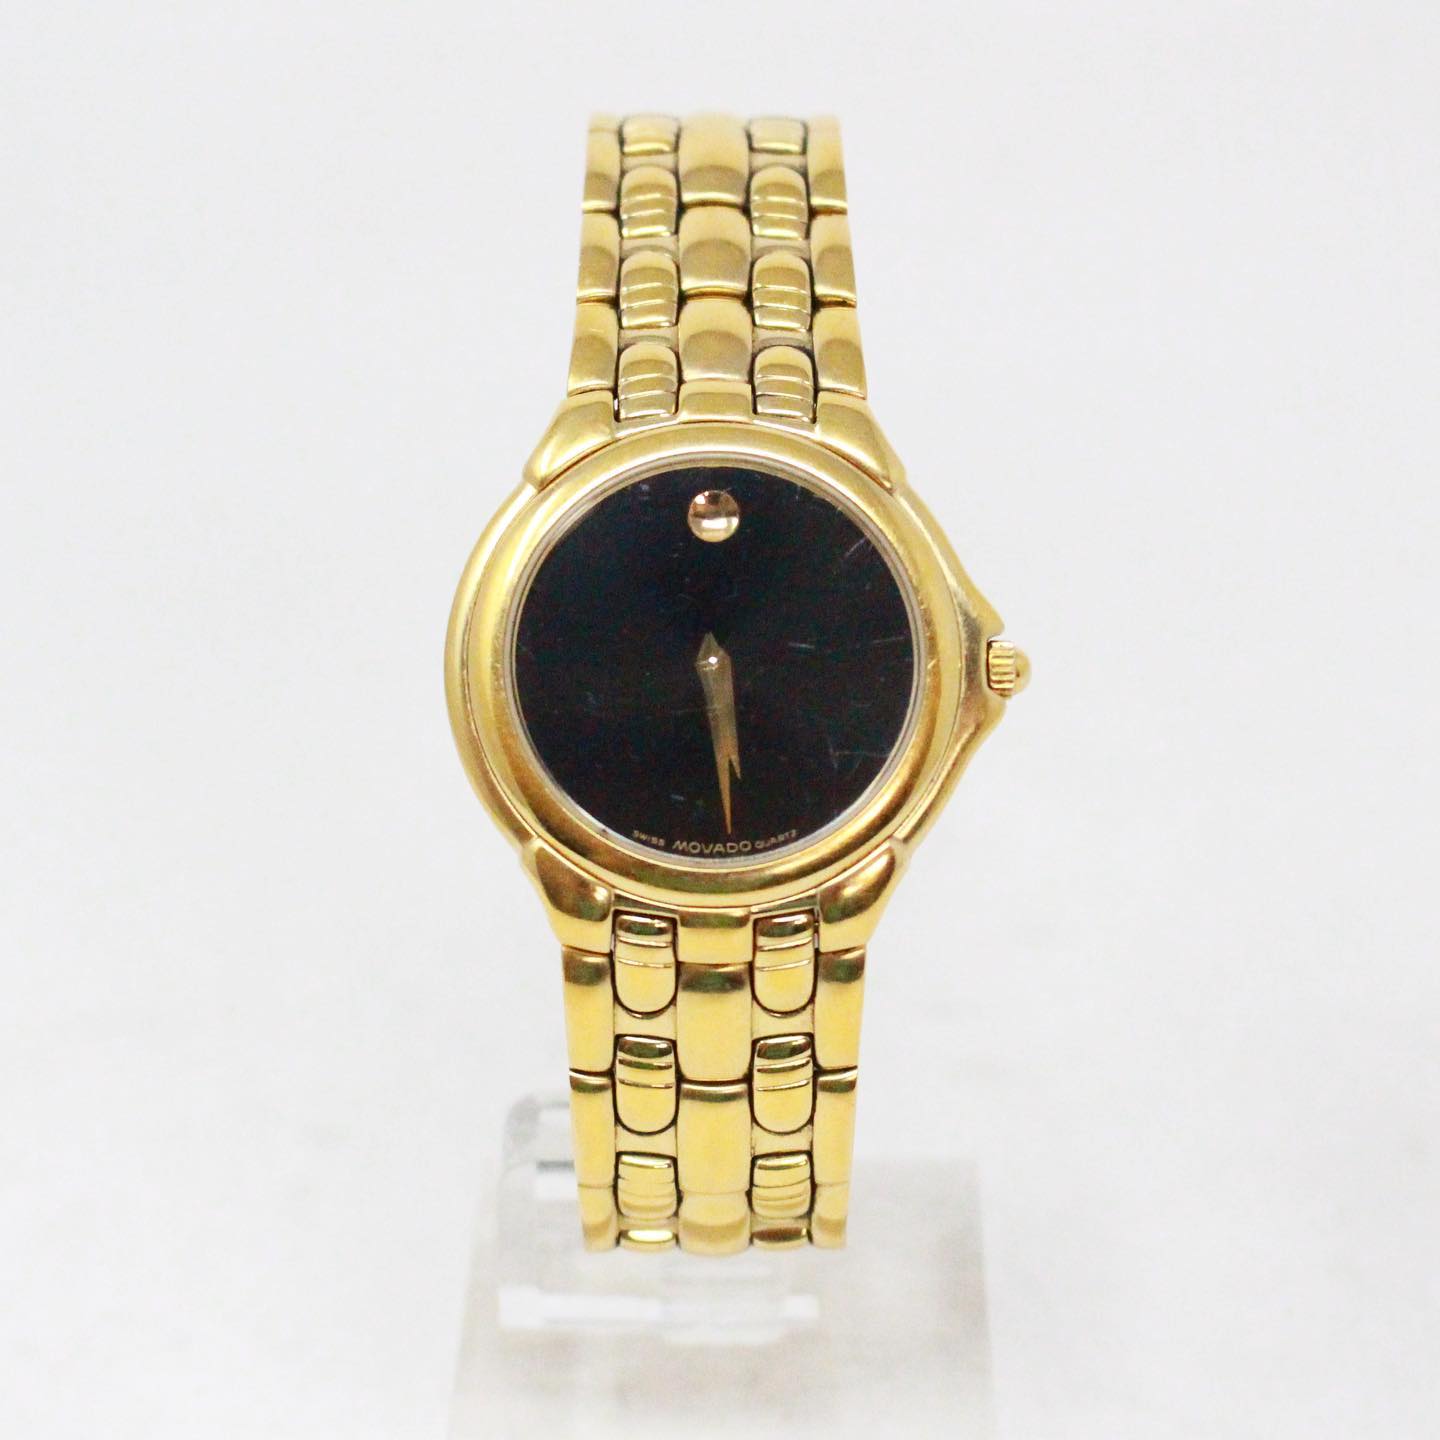 MOVADO Gold Tone Stainless Steel Chain Link Watch item 40382 1